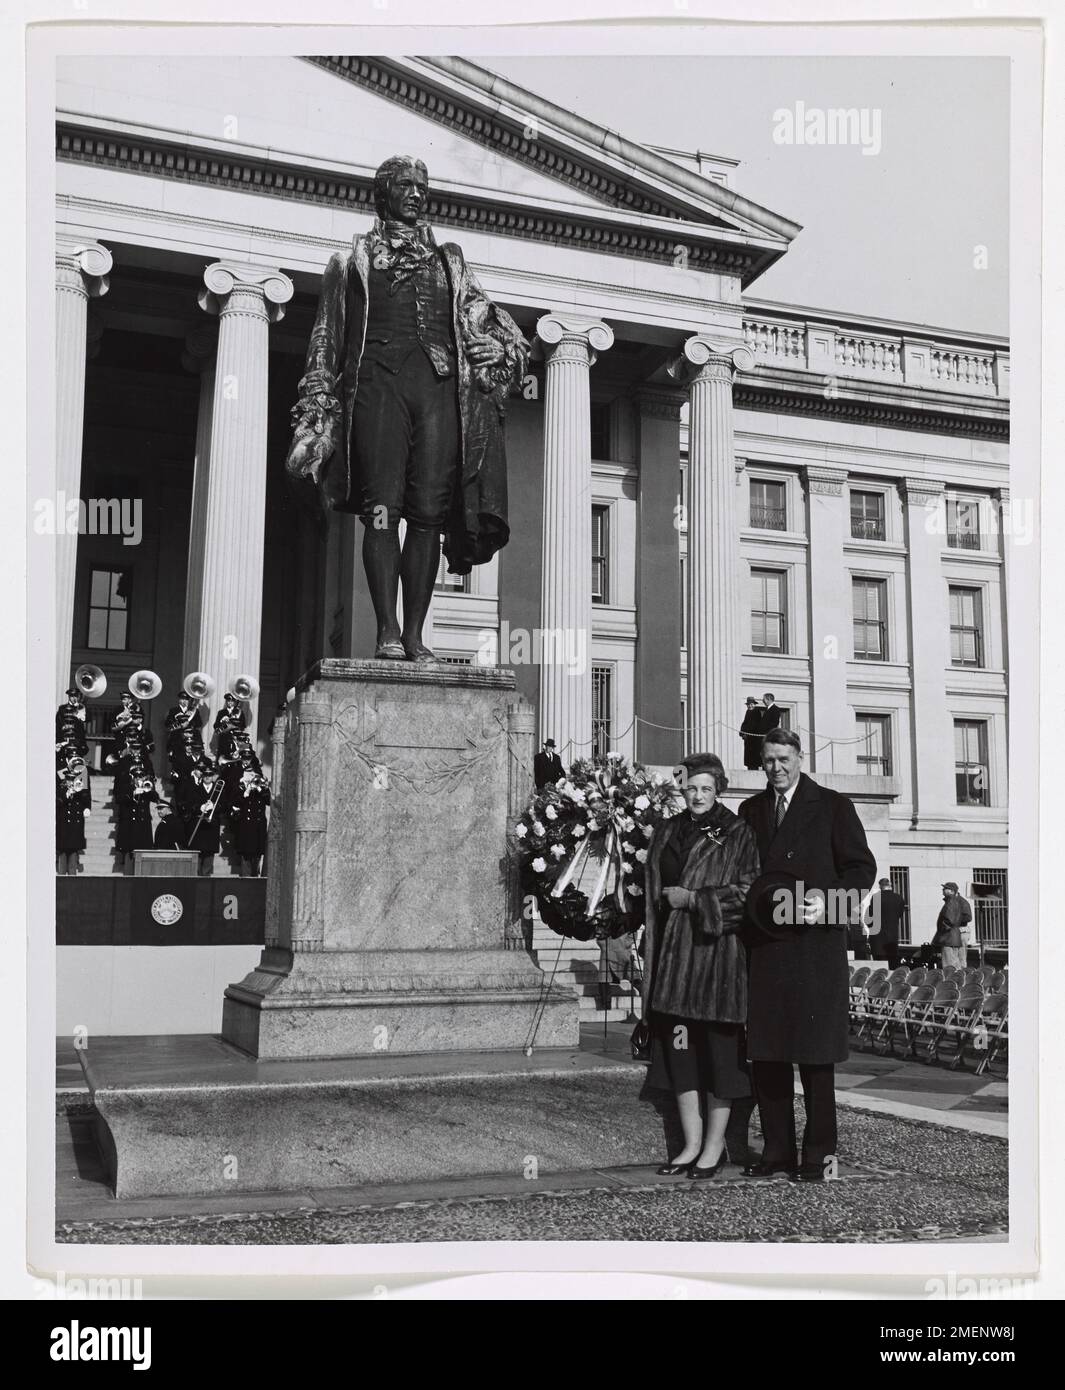 Photograph of a Man and Woman Standing in Front of Alexander Hamilton Statue. Stock Photo